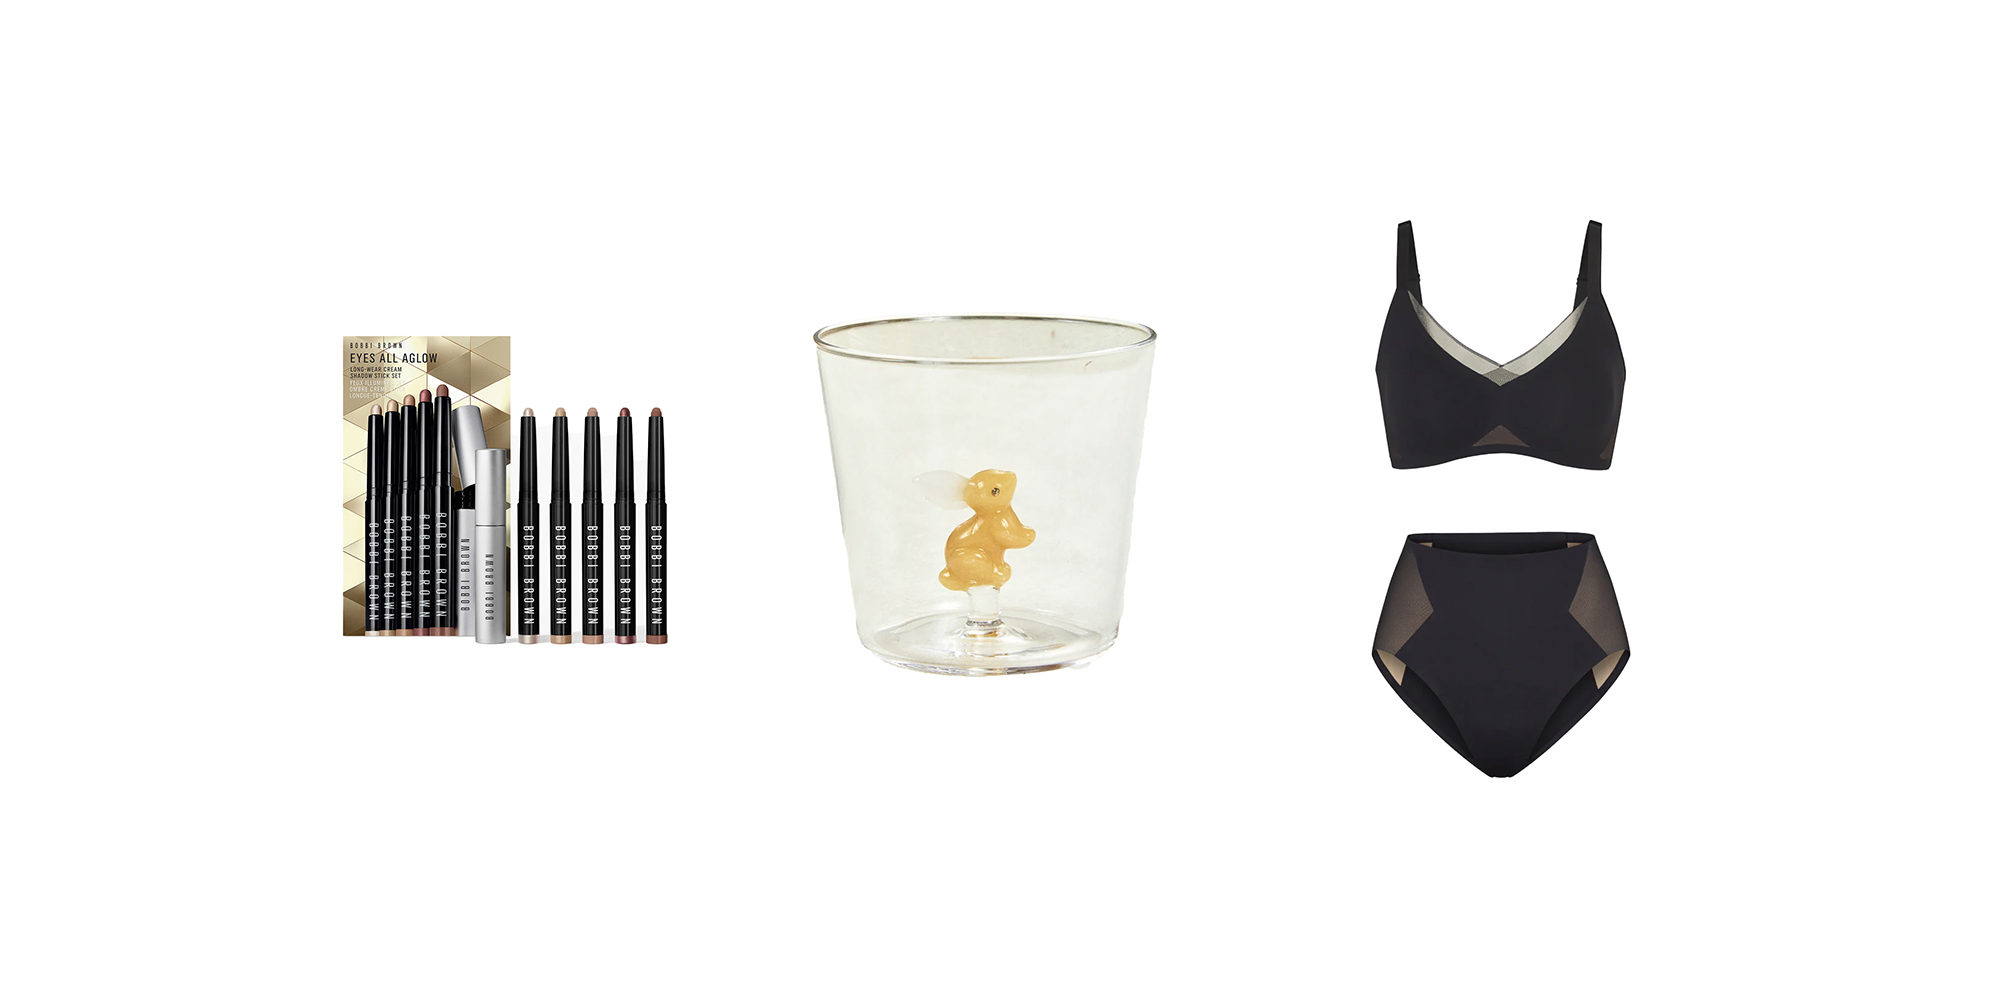 The Best Gifts For Women Who Have Everything, According To Bobbi